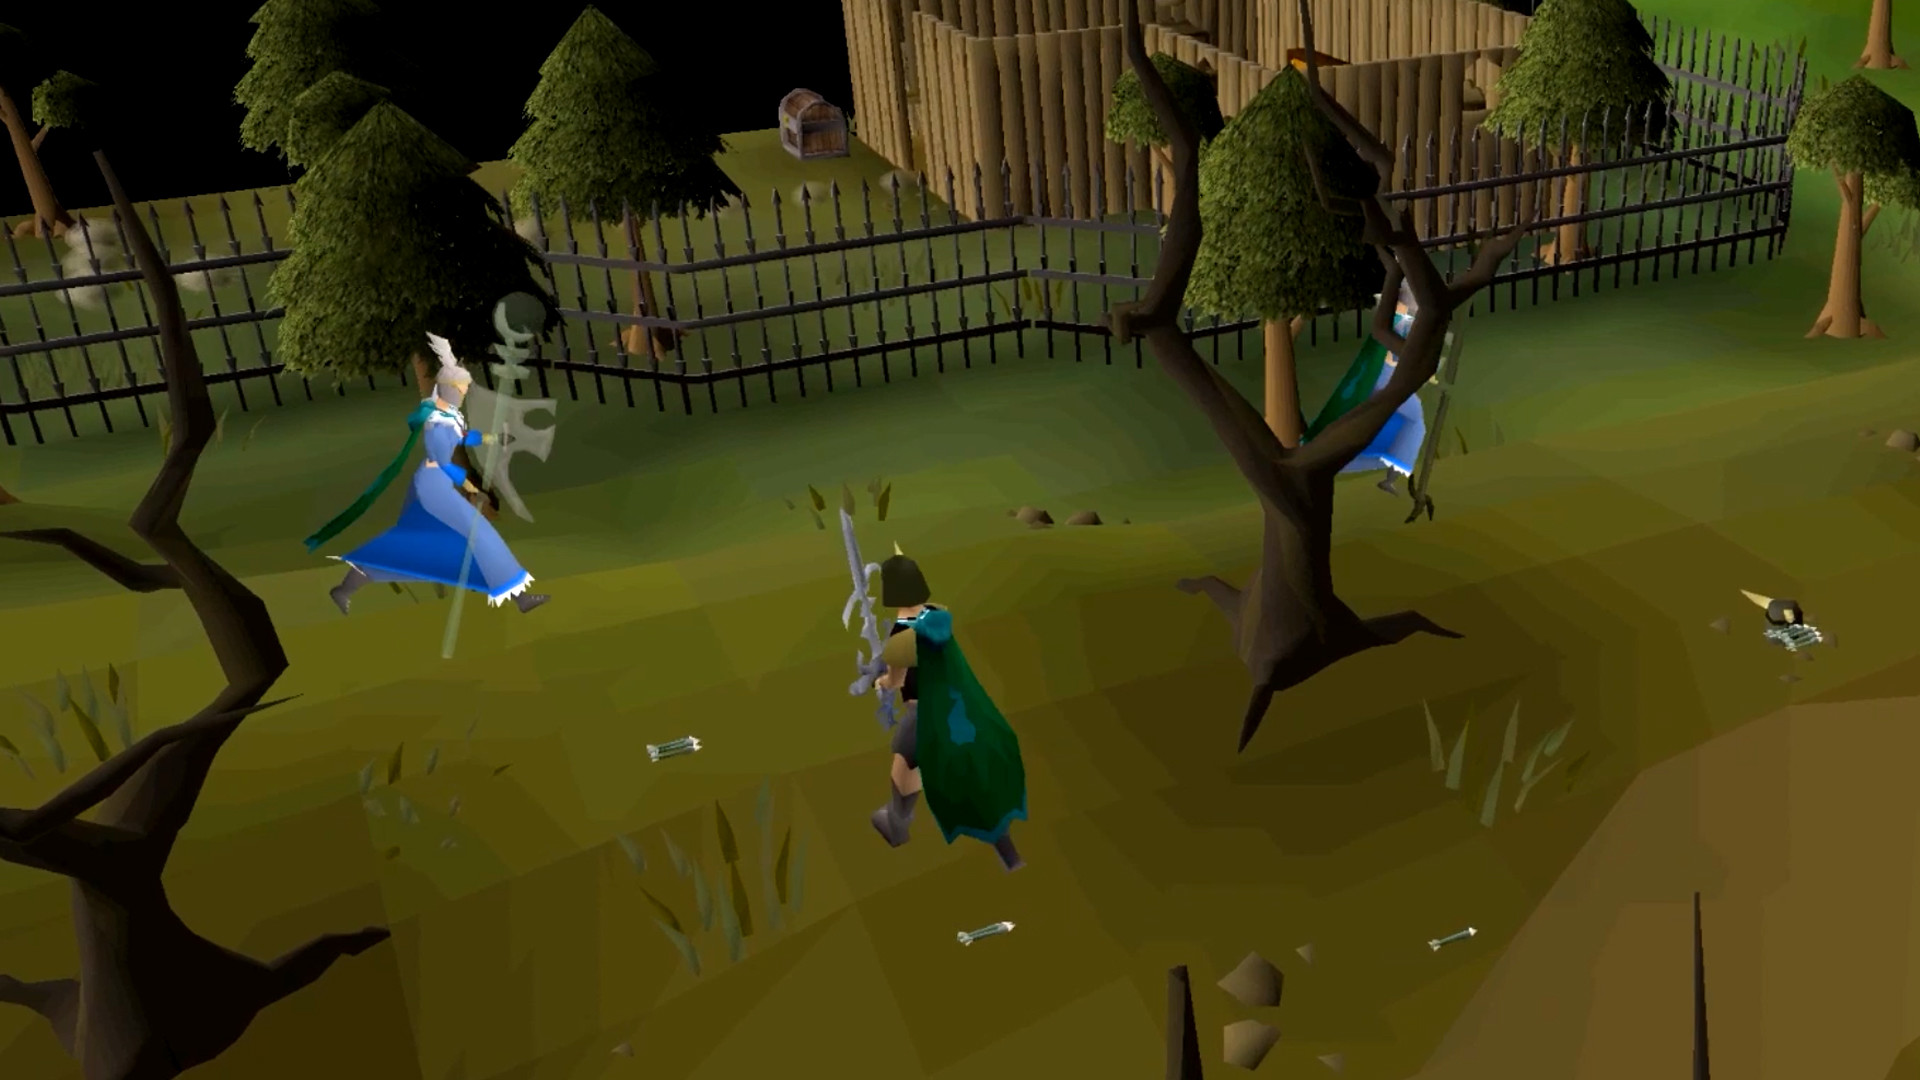 Touring Old School RuneScape, where 2007 never ended